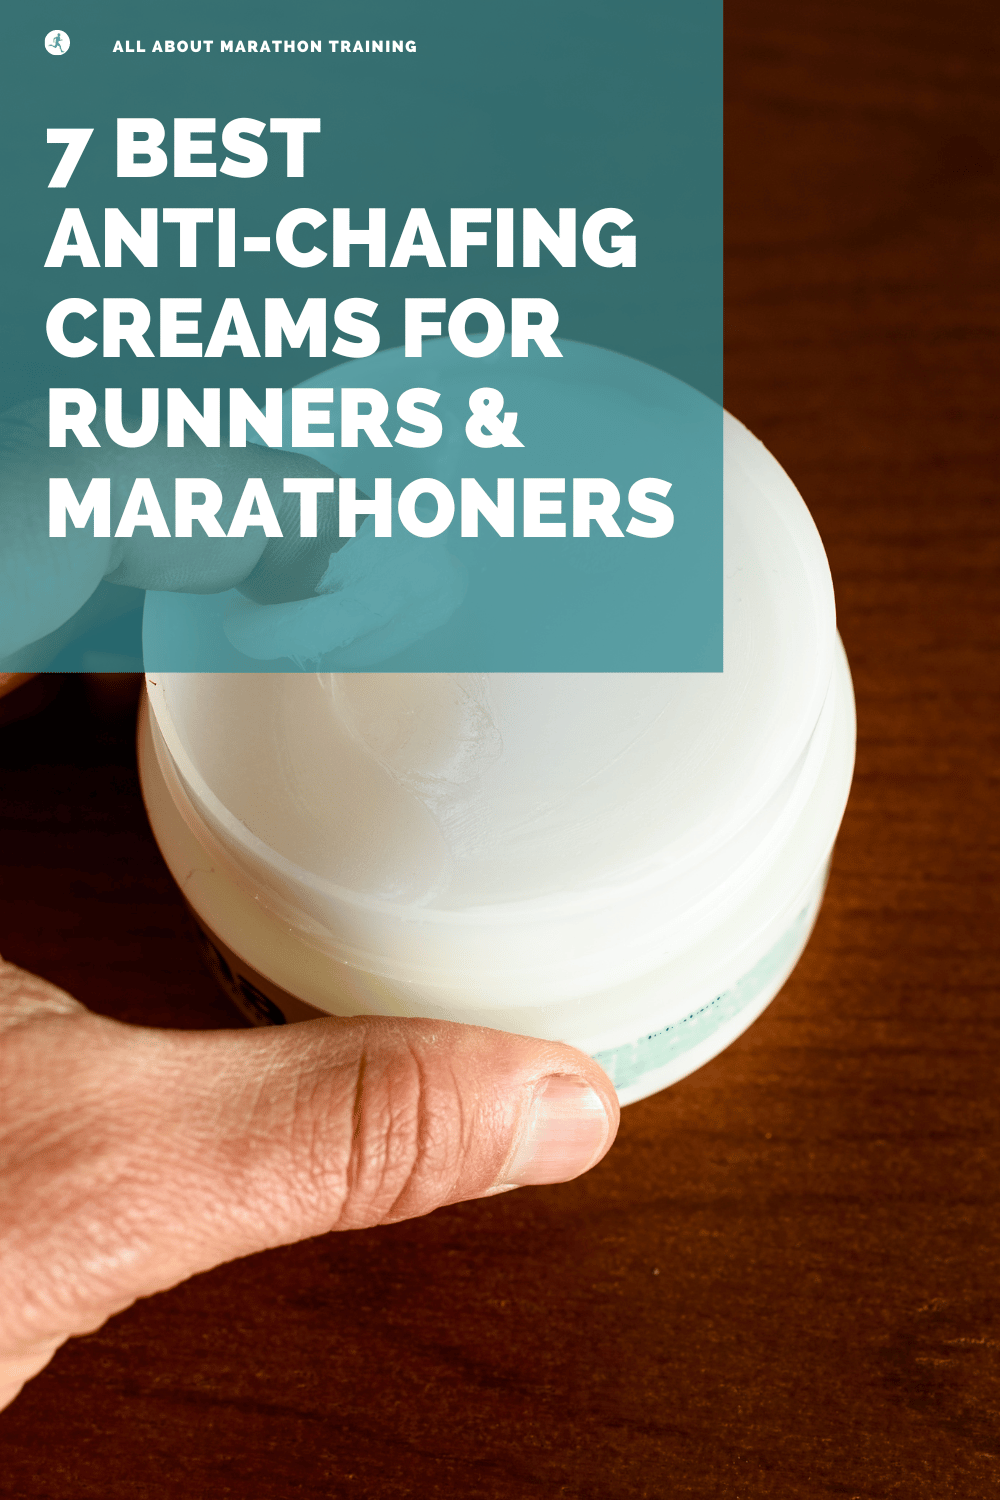 7 Best Anti-Chafing Cream for Runners